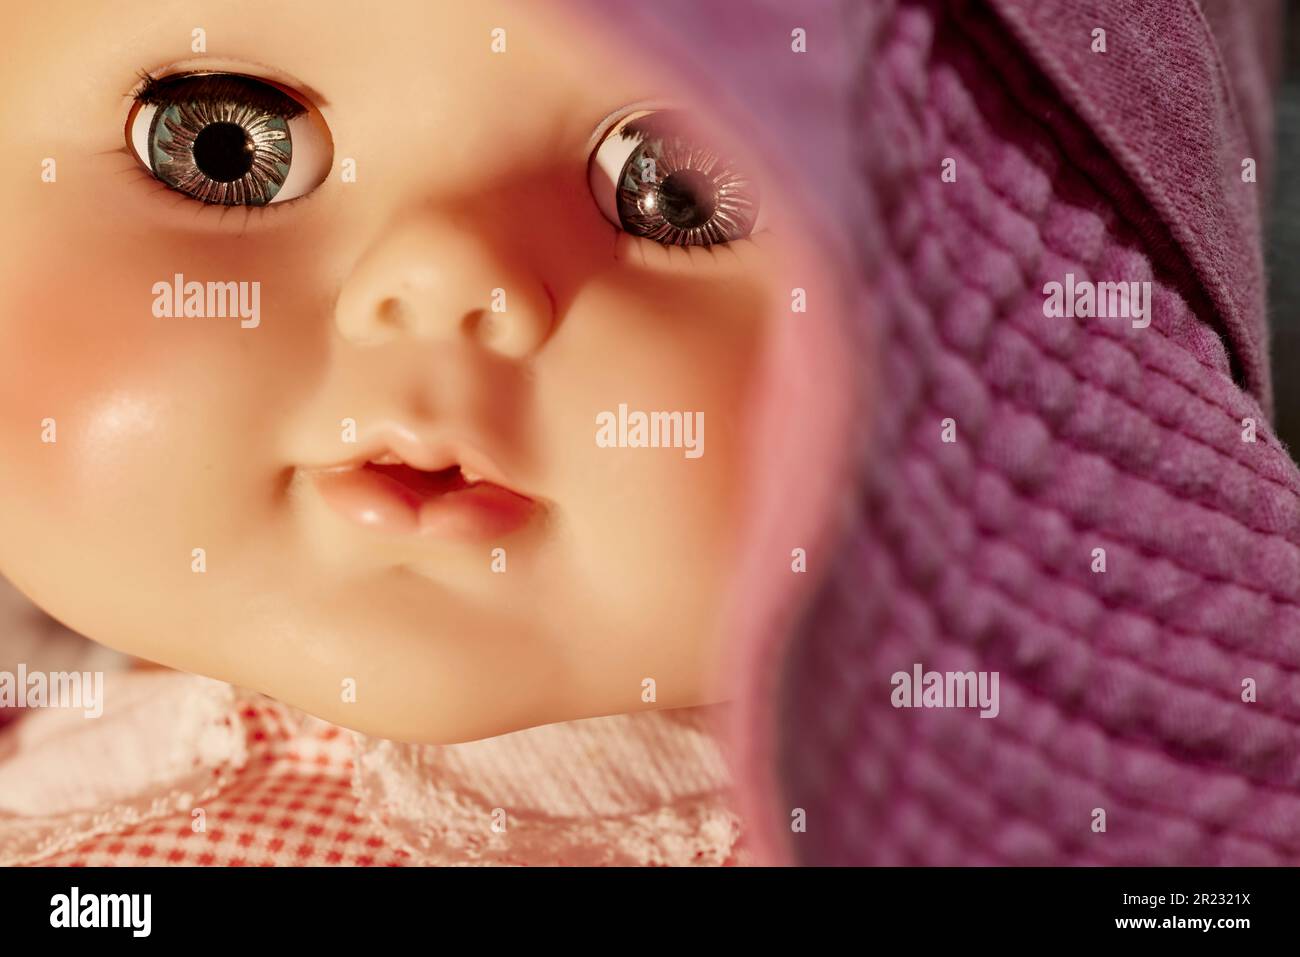 Close up of the Eye of a Vintage Doll with shallow depth of field Stock Photo